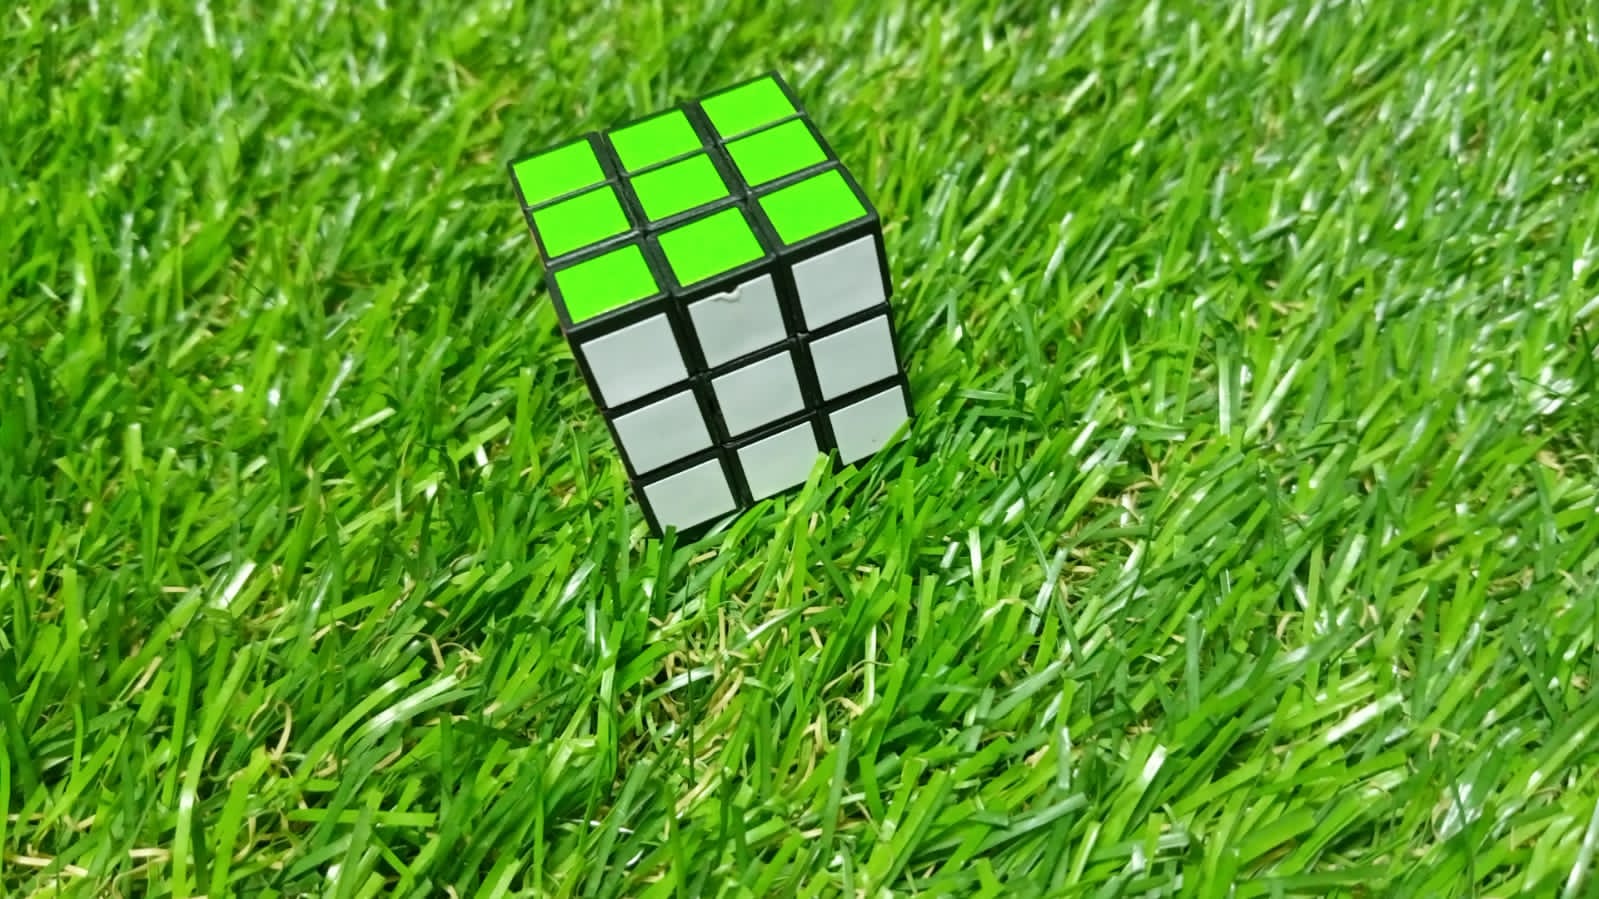 4022 1Pc Mini Cube, Puzzle Game for Boy And Girl, Magic Cube for Birthday Gift Dukandaily